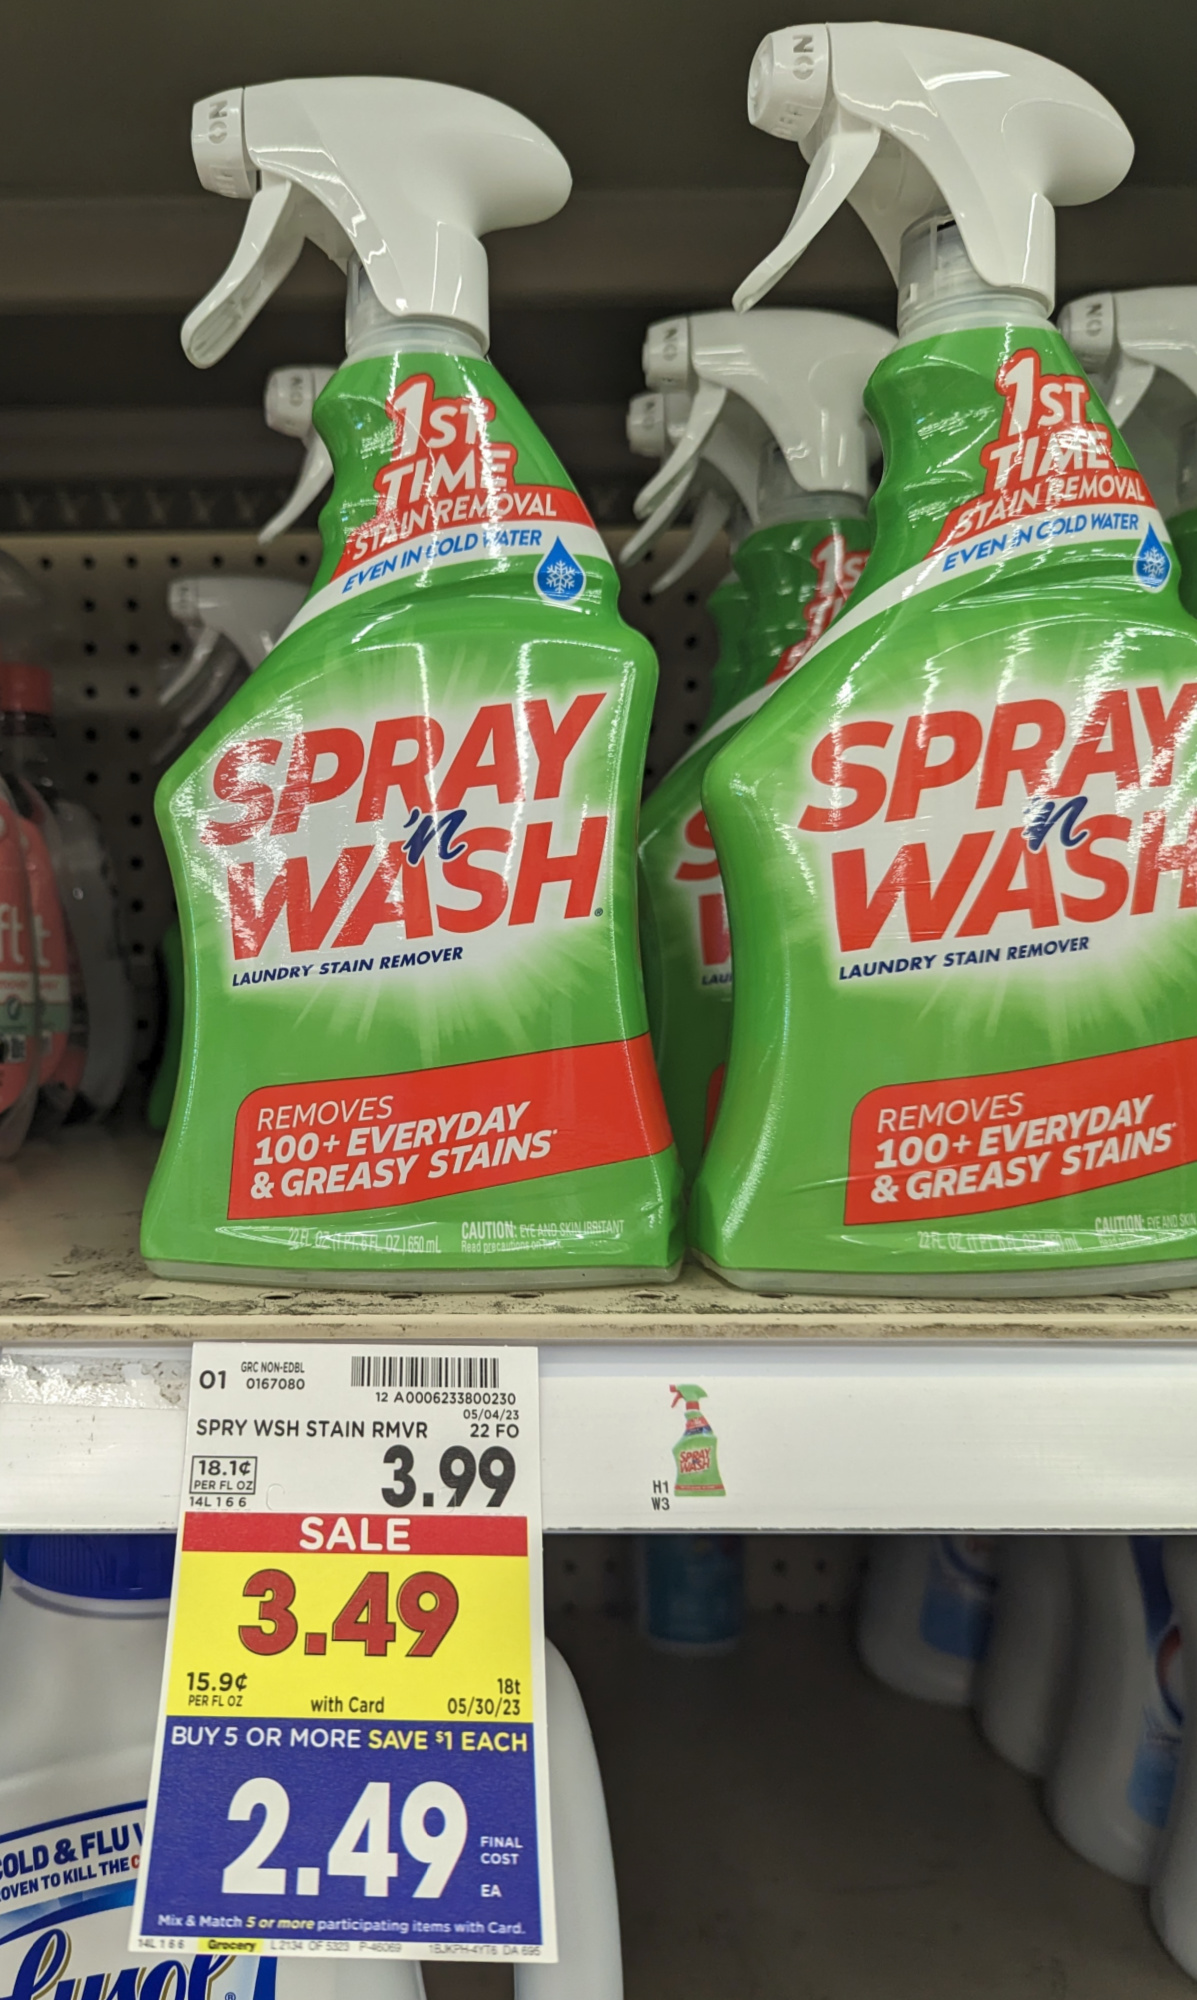 Spray n Wash Laundry Stain Remover, Shop